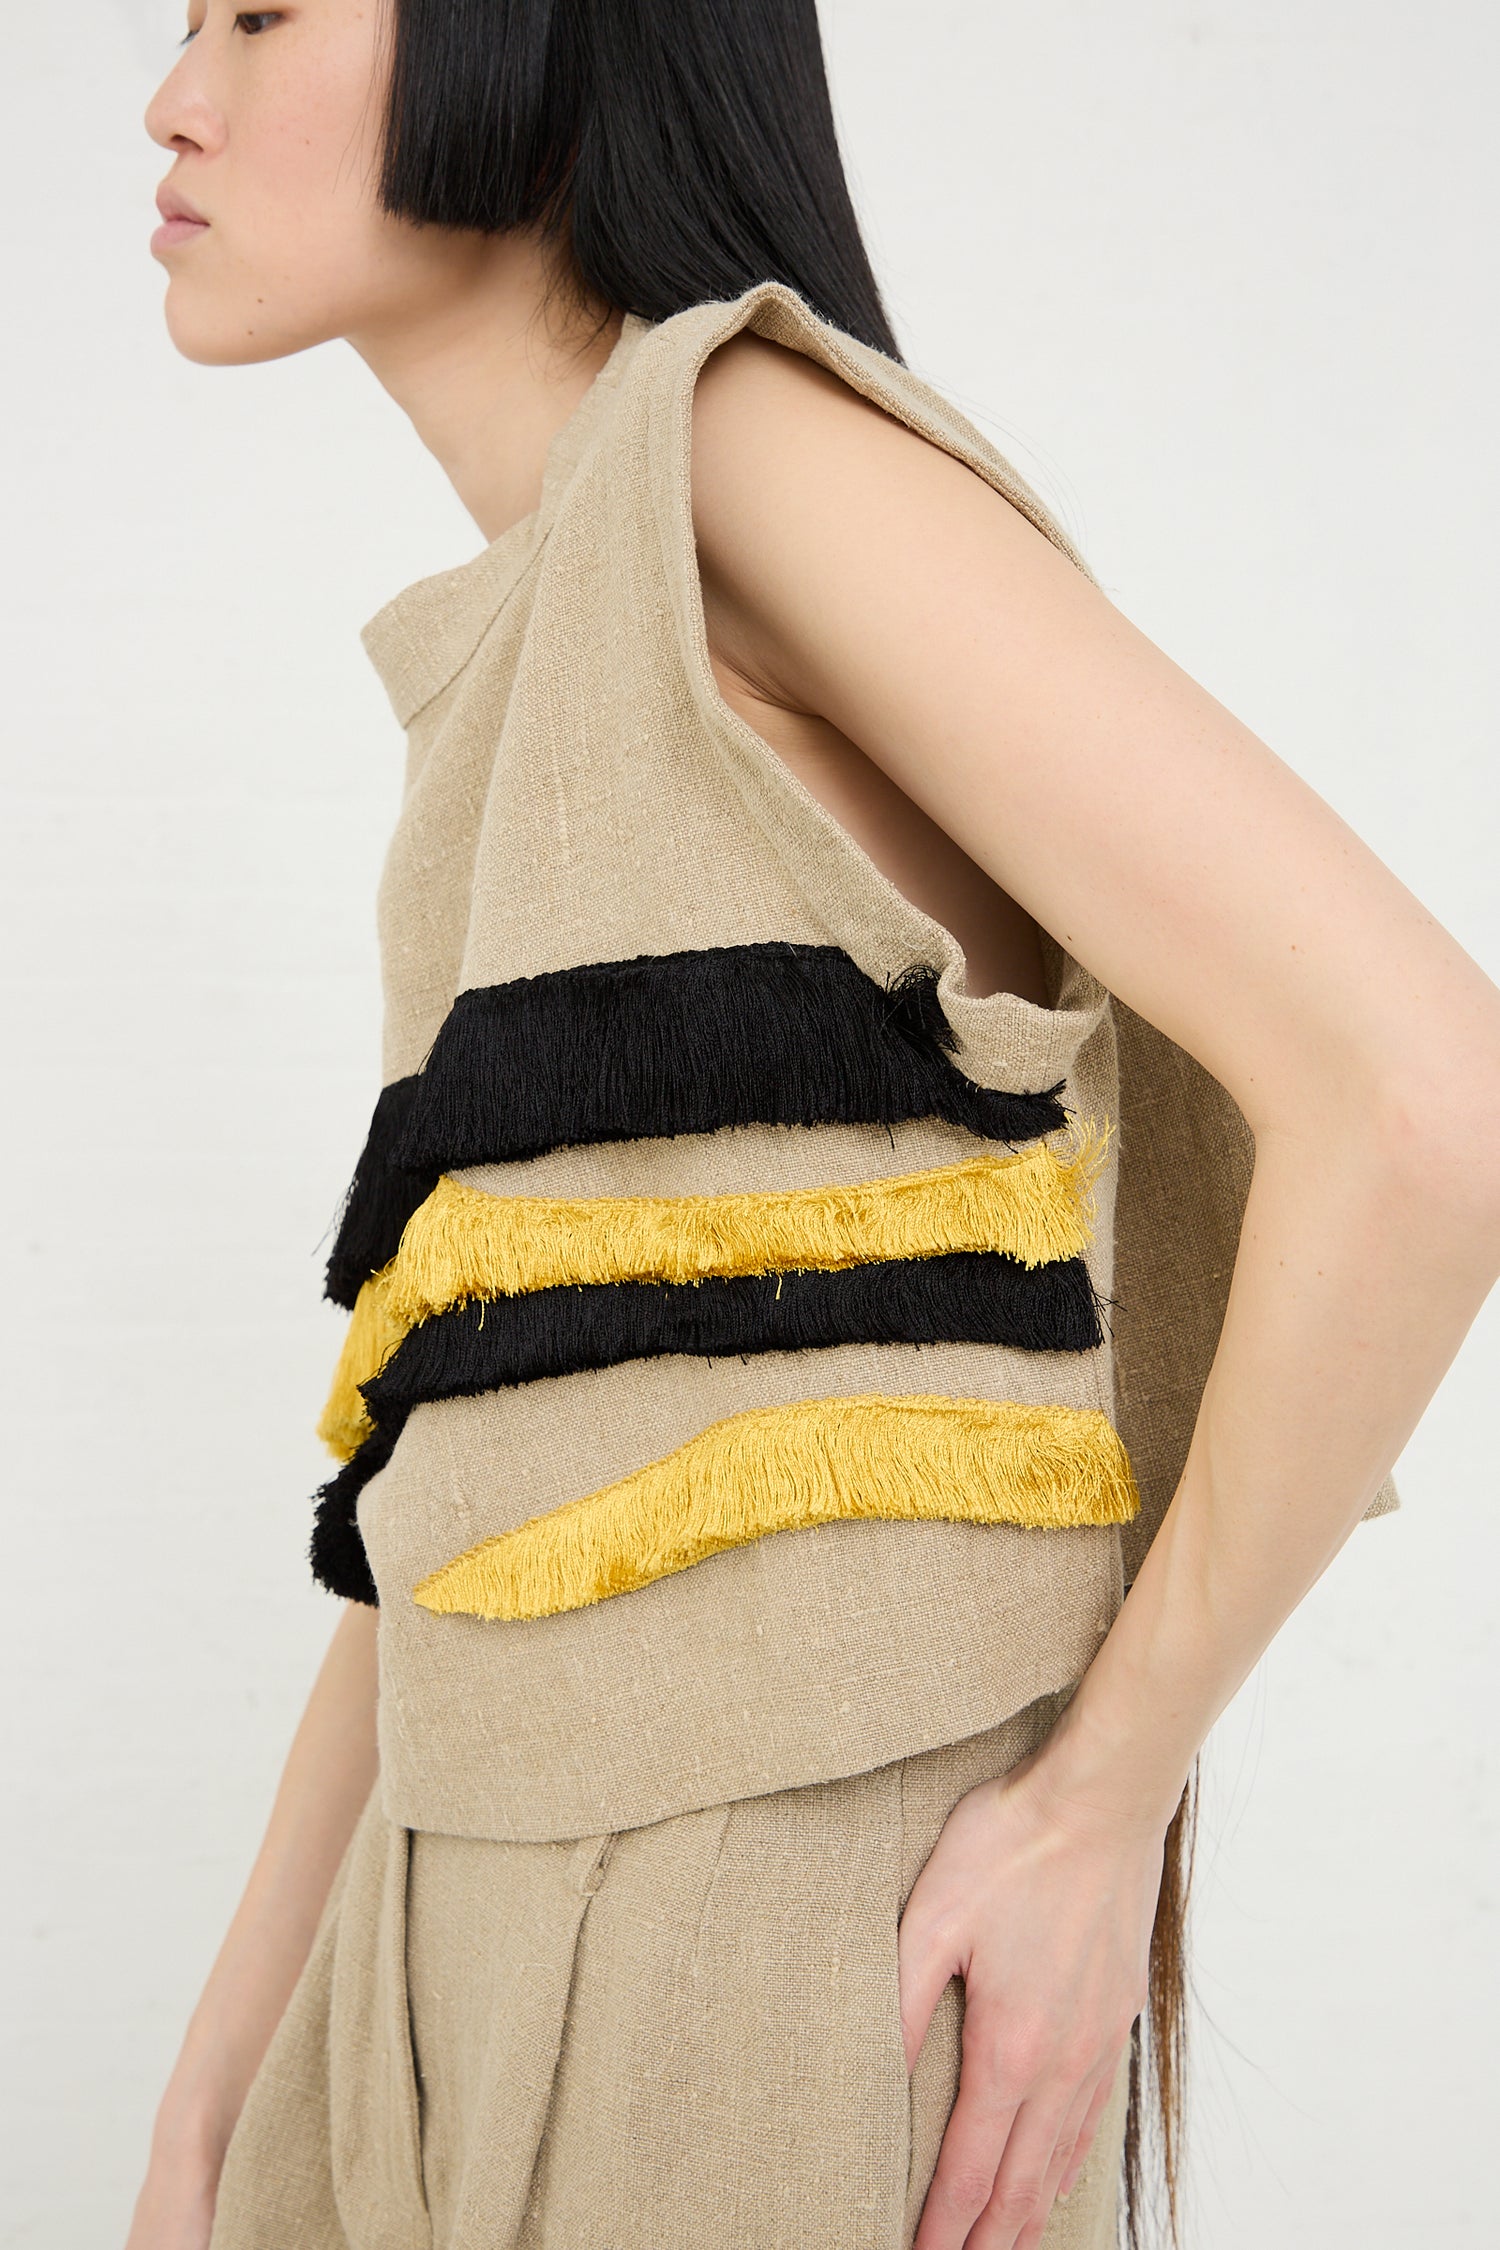 Woman modeling a Bacchus Top in Natural by Rachel Comey with black and yellow fringe details.